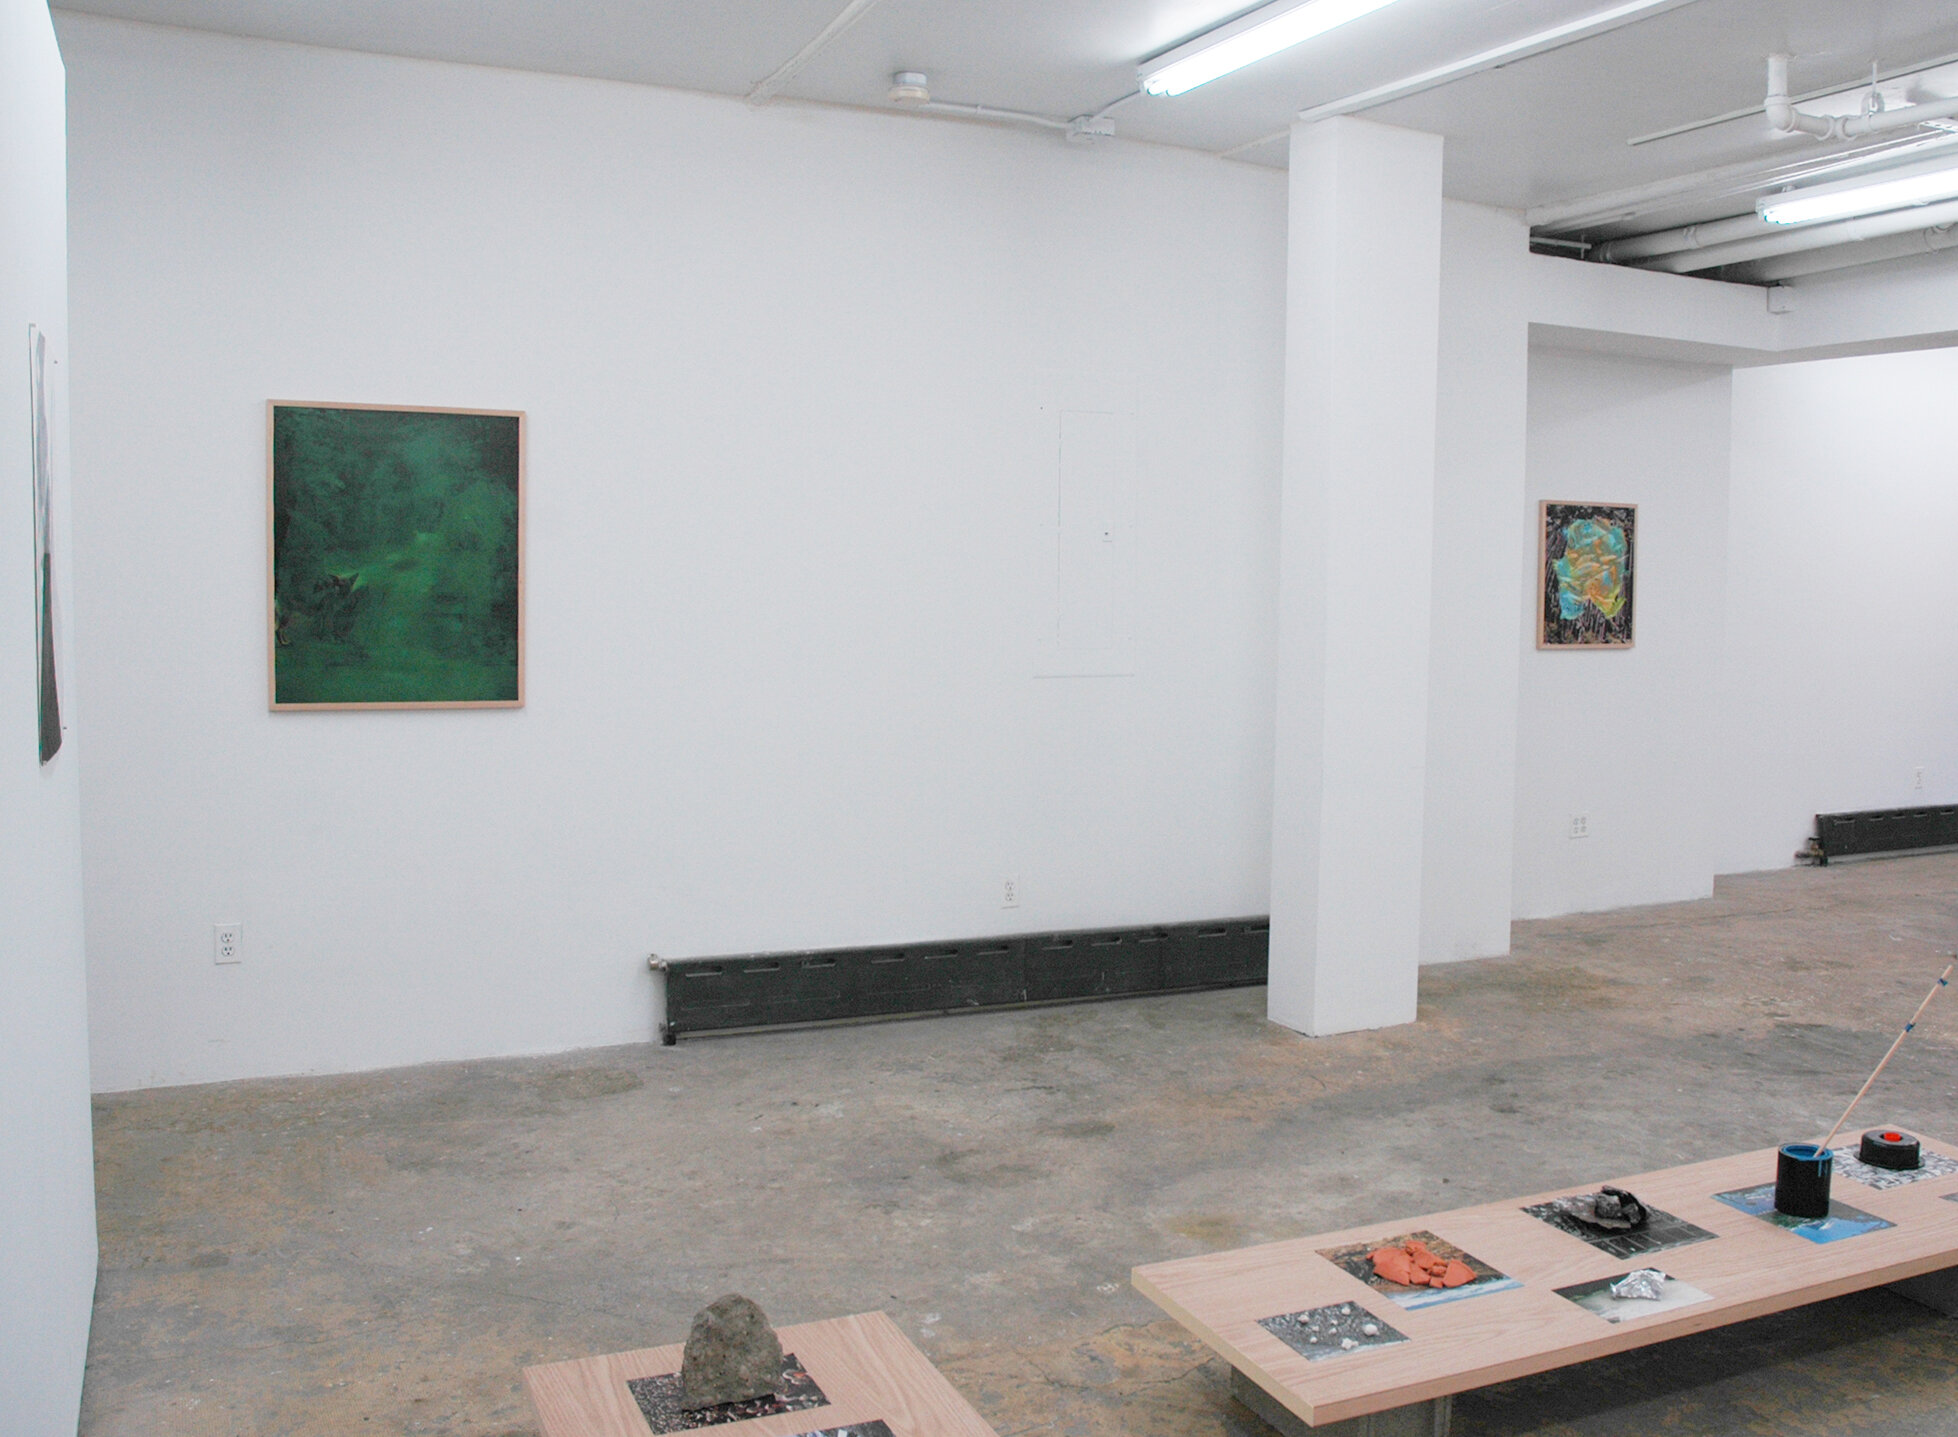 Installation image from the 2012 exhibition, Adam Hayes/Rusty Shackleford, at Cindy Rucker Gallery